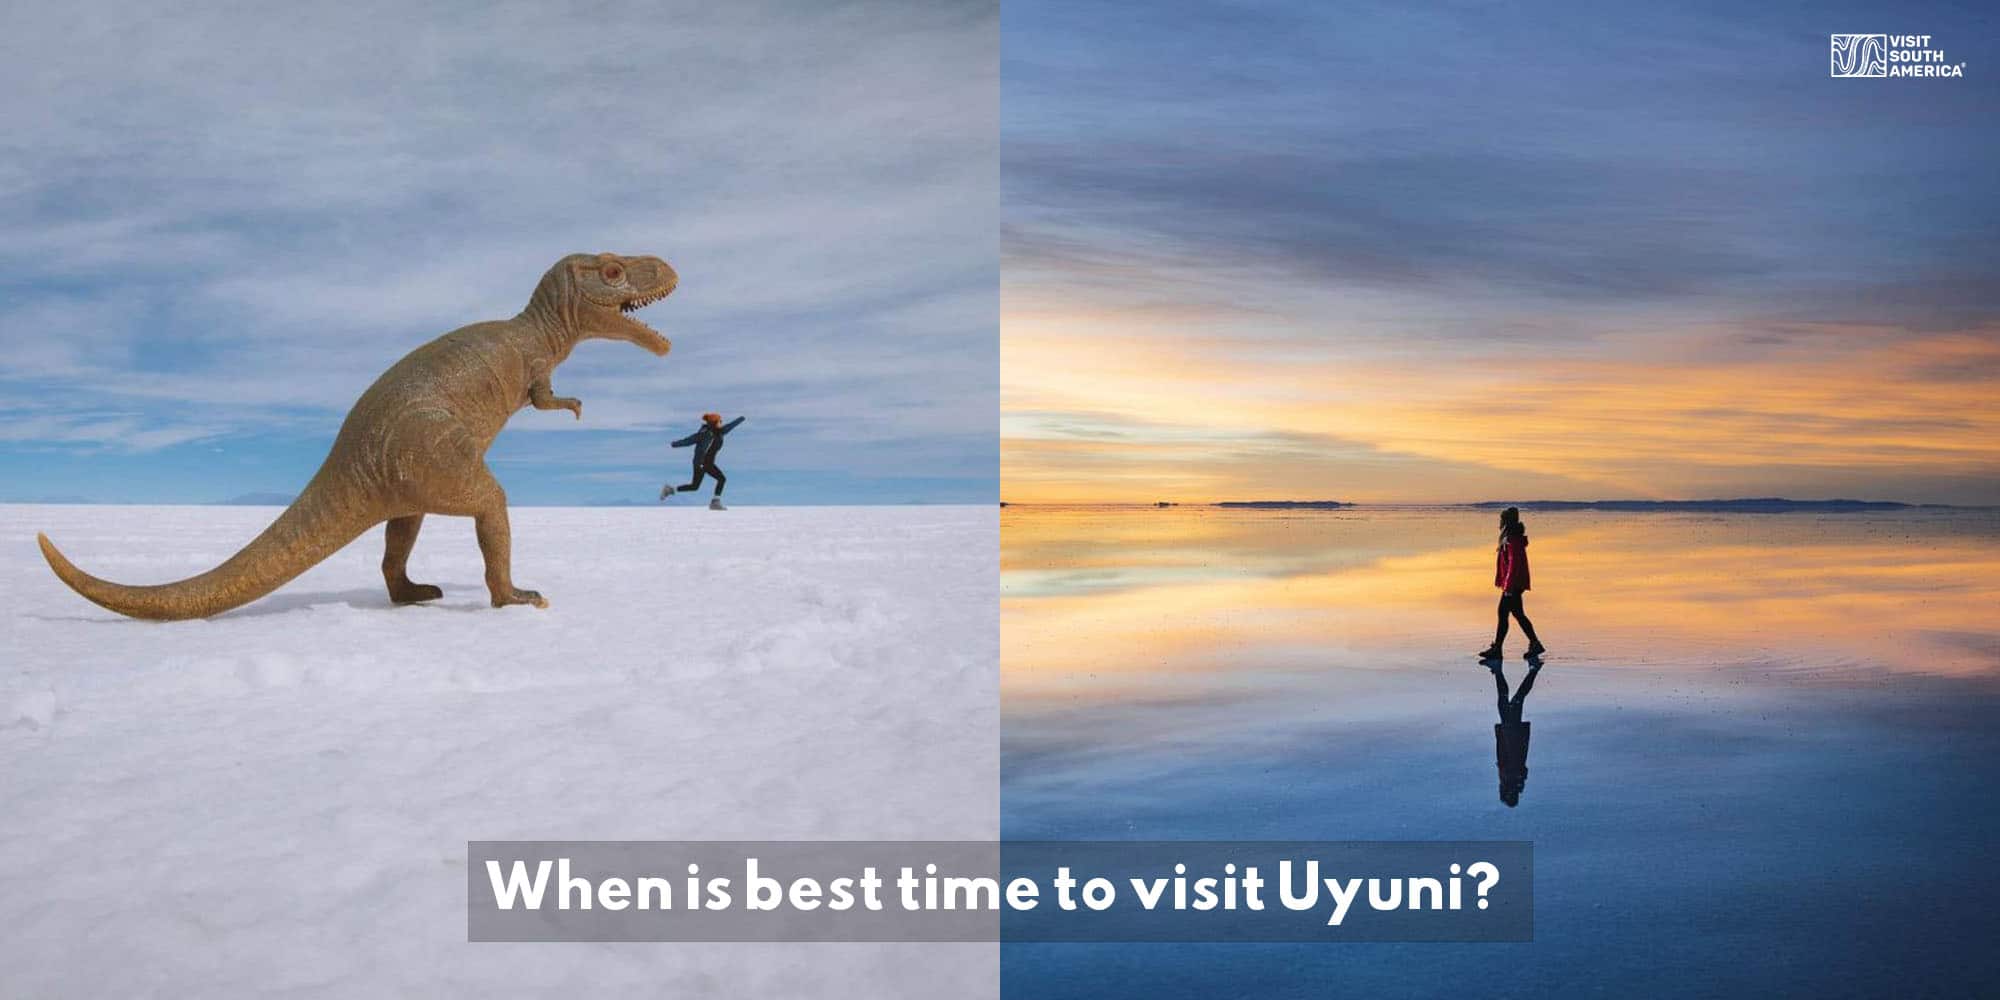 When is the best time to visit Uyuni and the Deserts? (2022 updated)